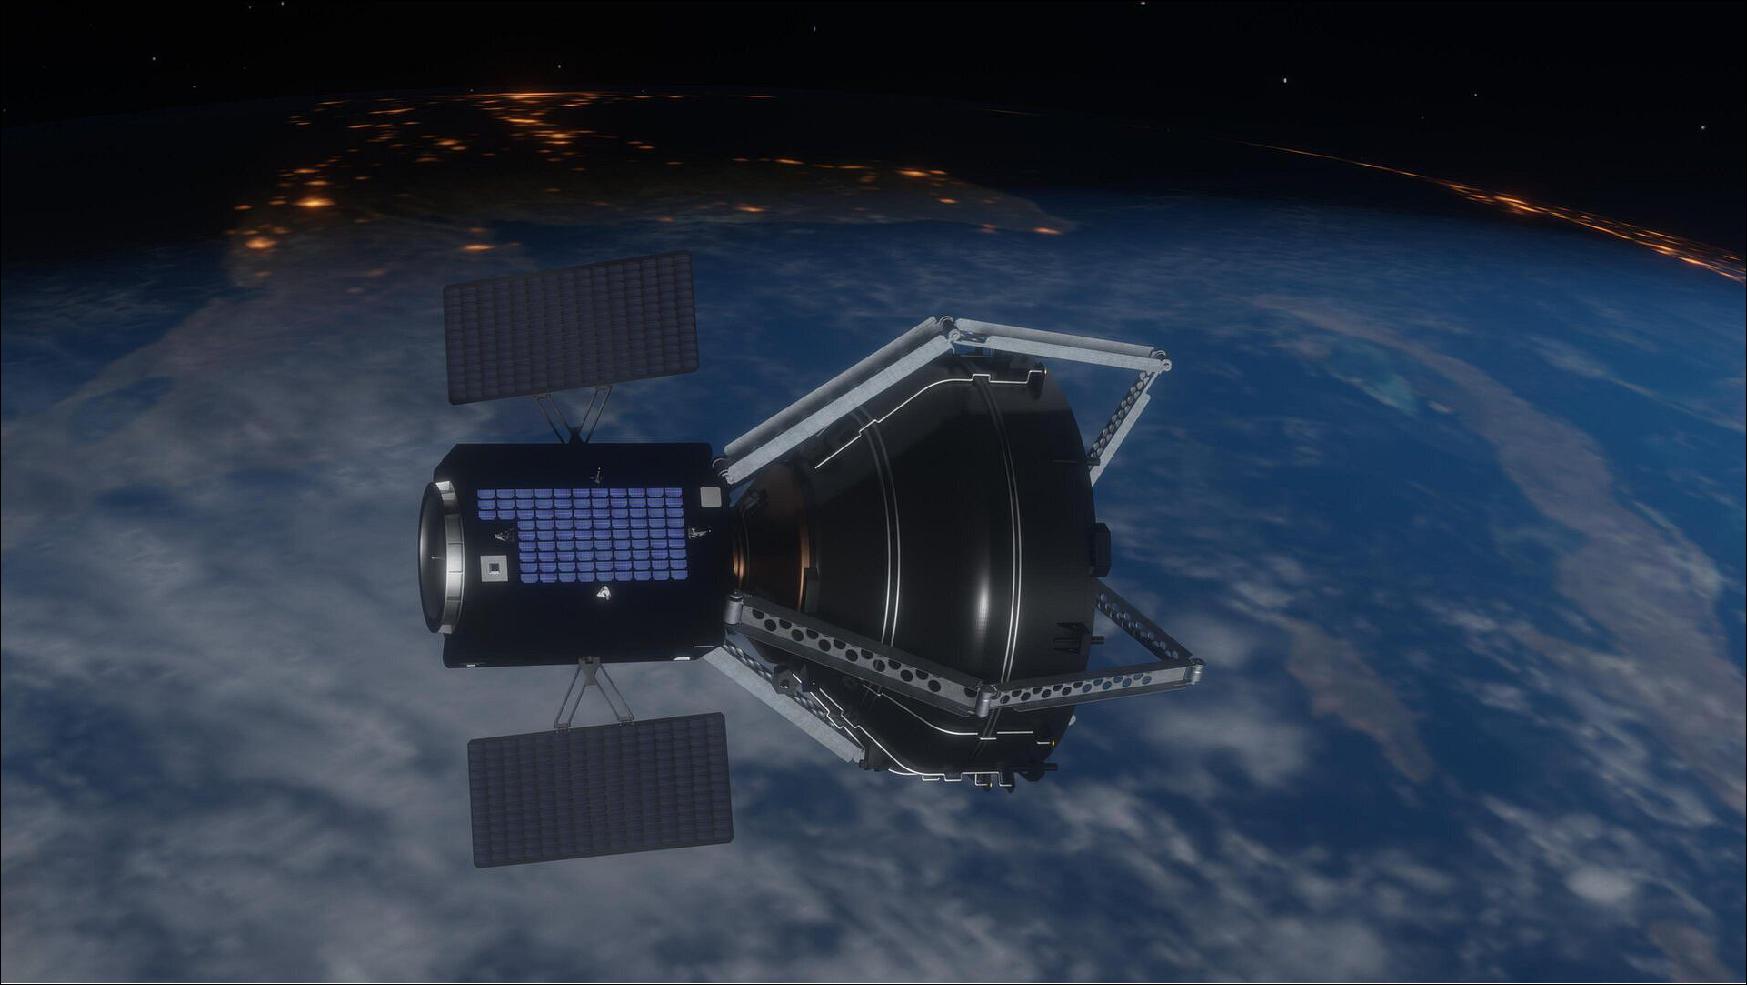 Figure 4: ClearSpace-1 prepares to reenter with VESPA (image credit: ClearSpace SA)